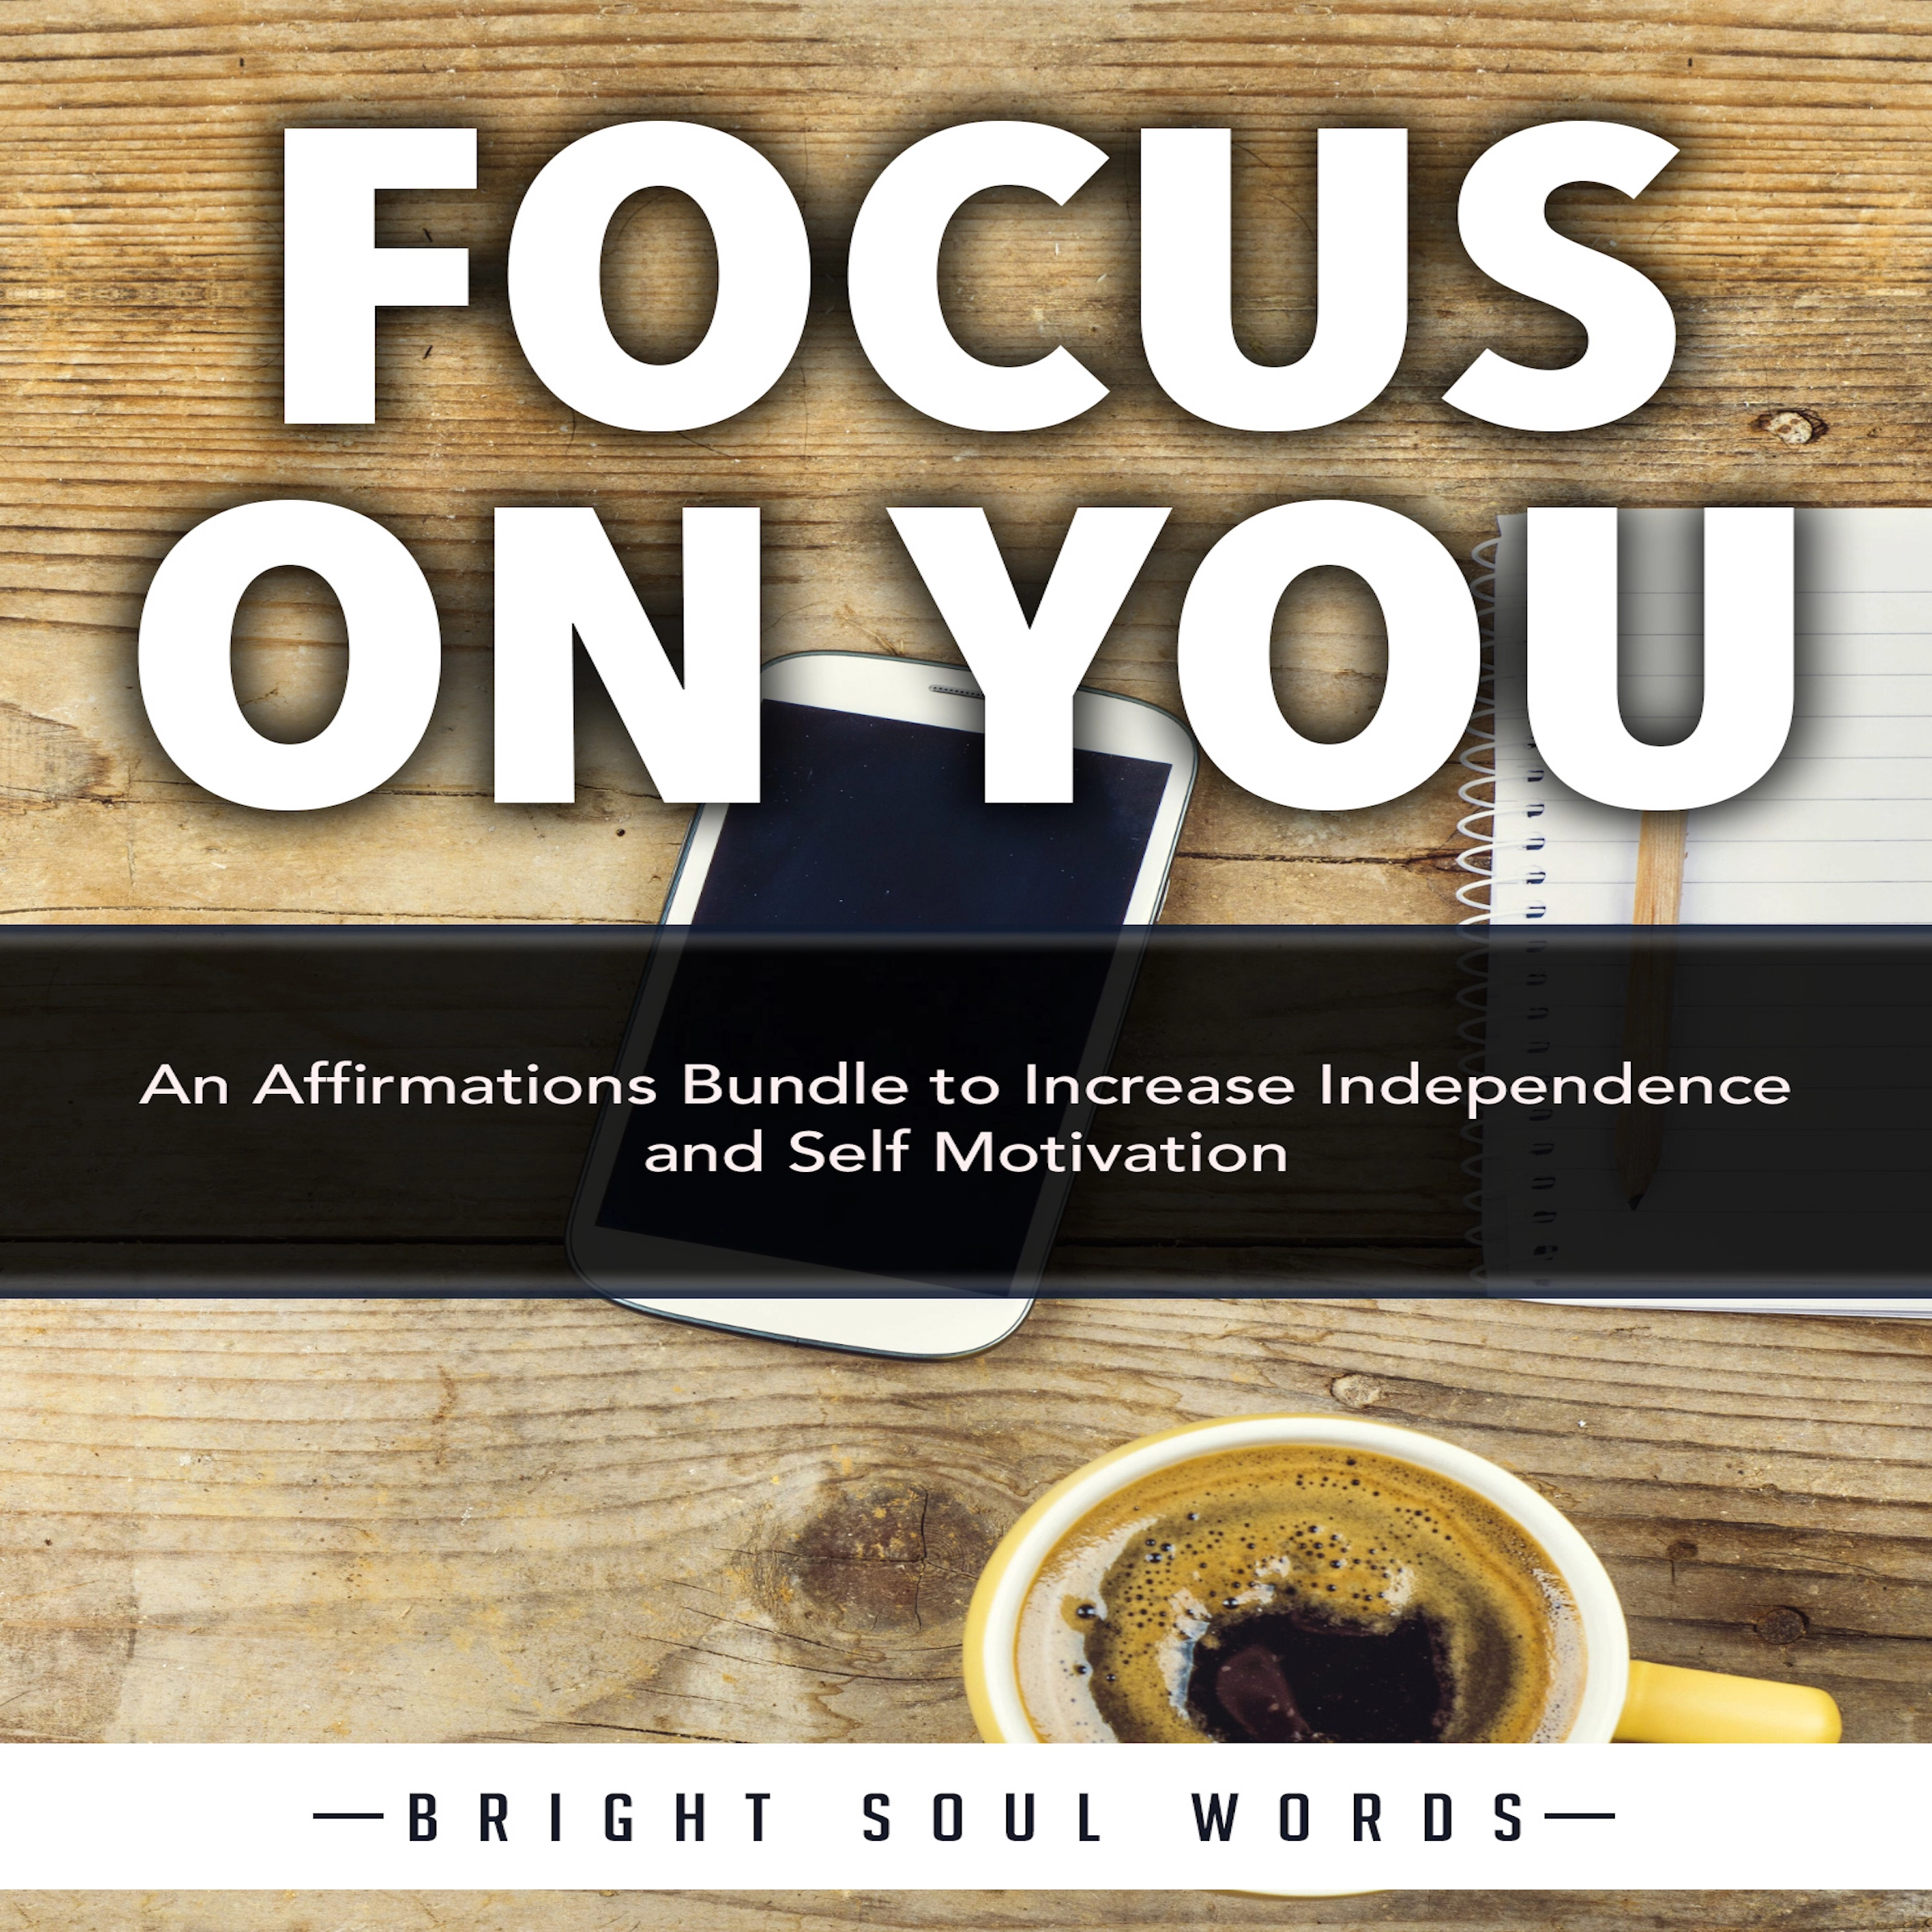 Focus on You: An Affirmations Bundle to Increase Independence and Self Motivation by Bright Soul Words